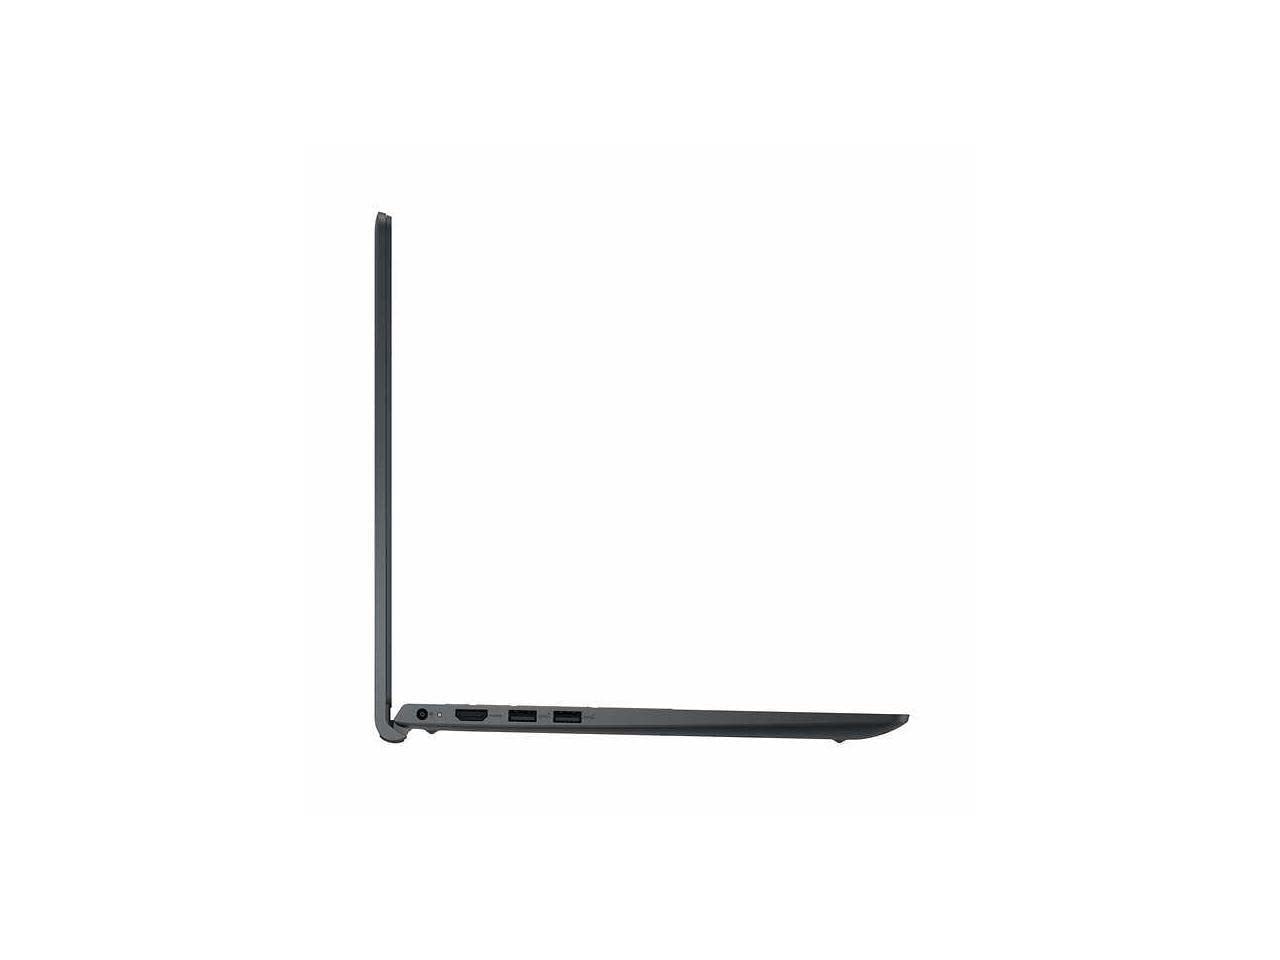 Dell laptop and Wi-Fi router